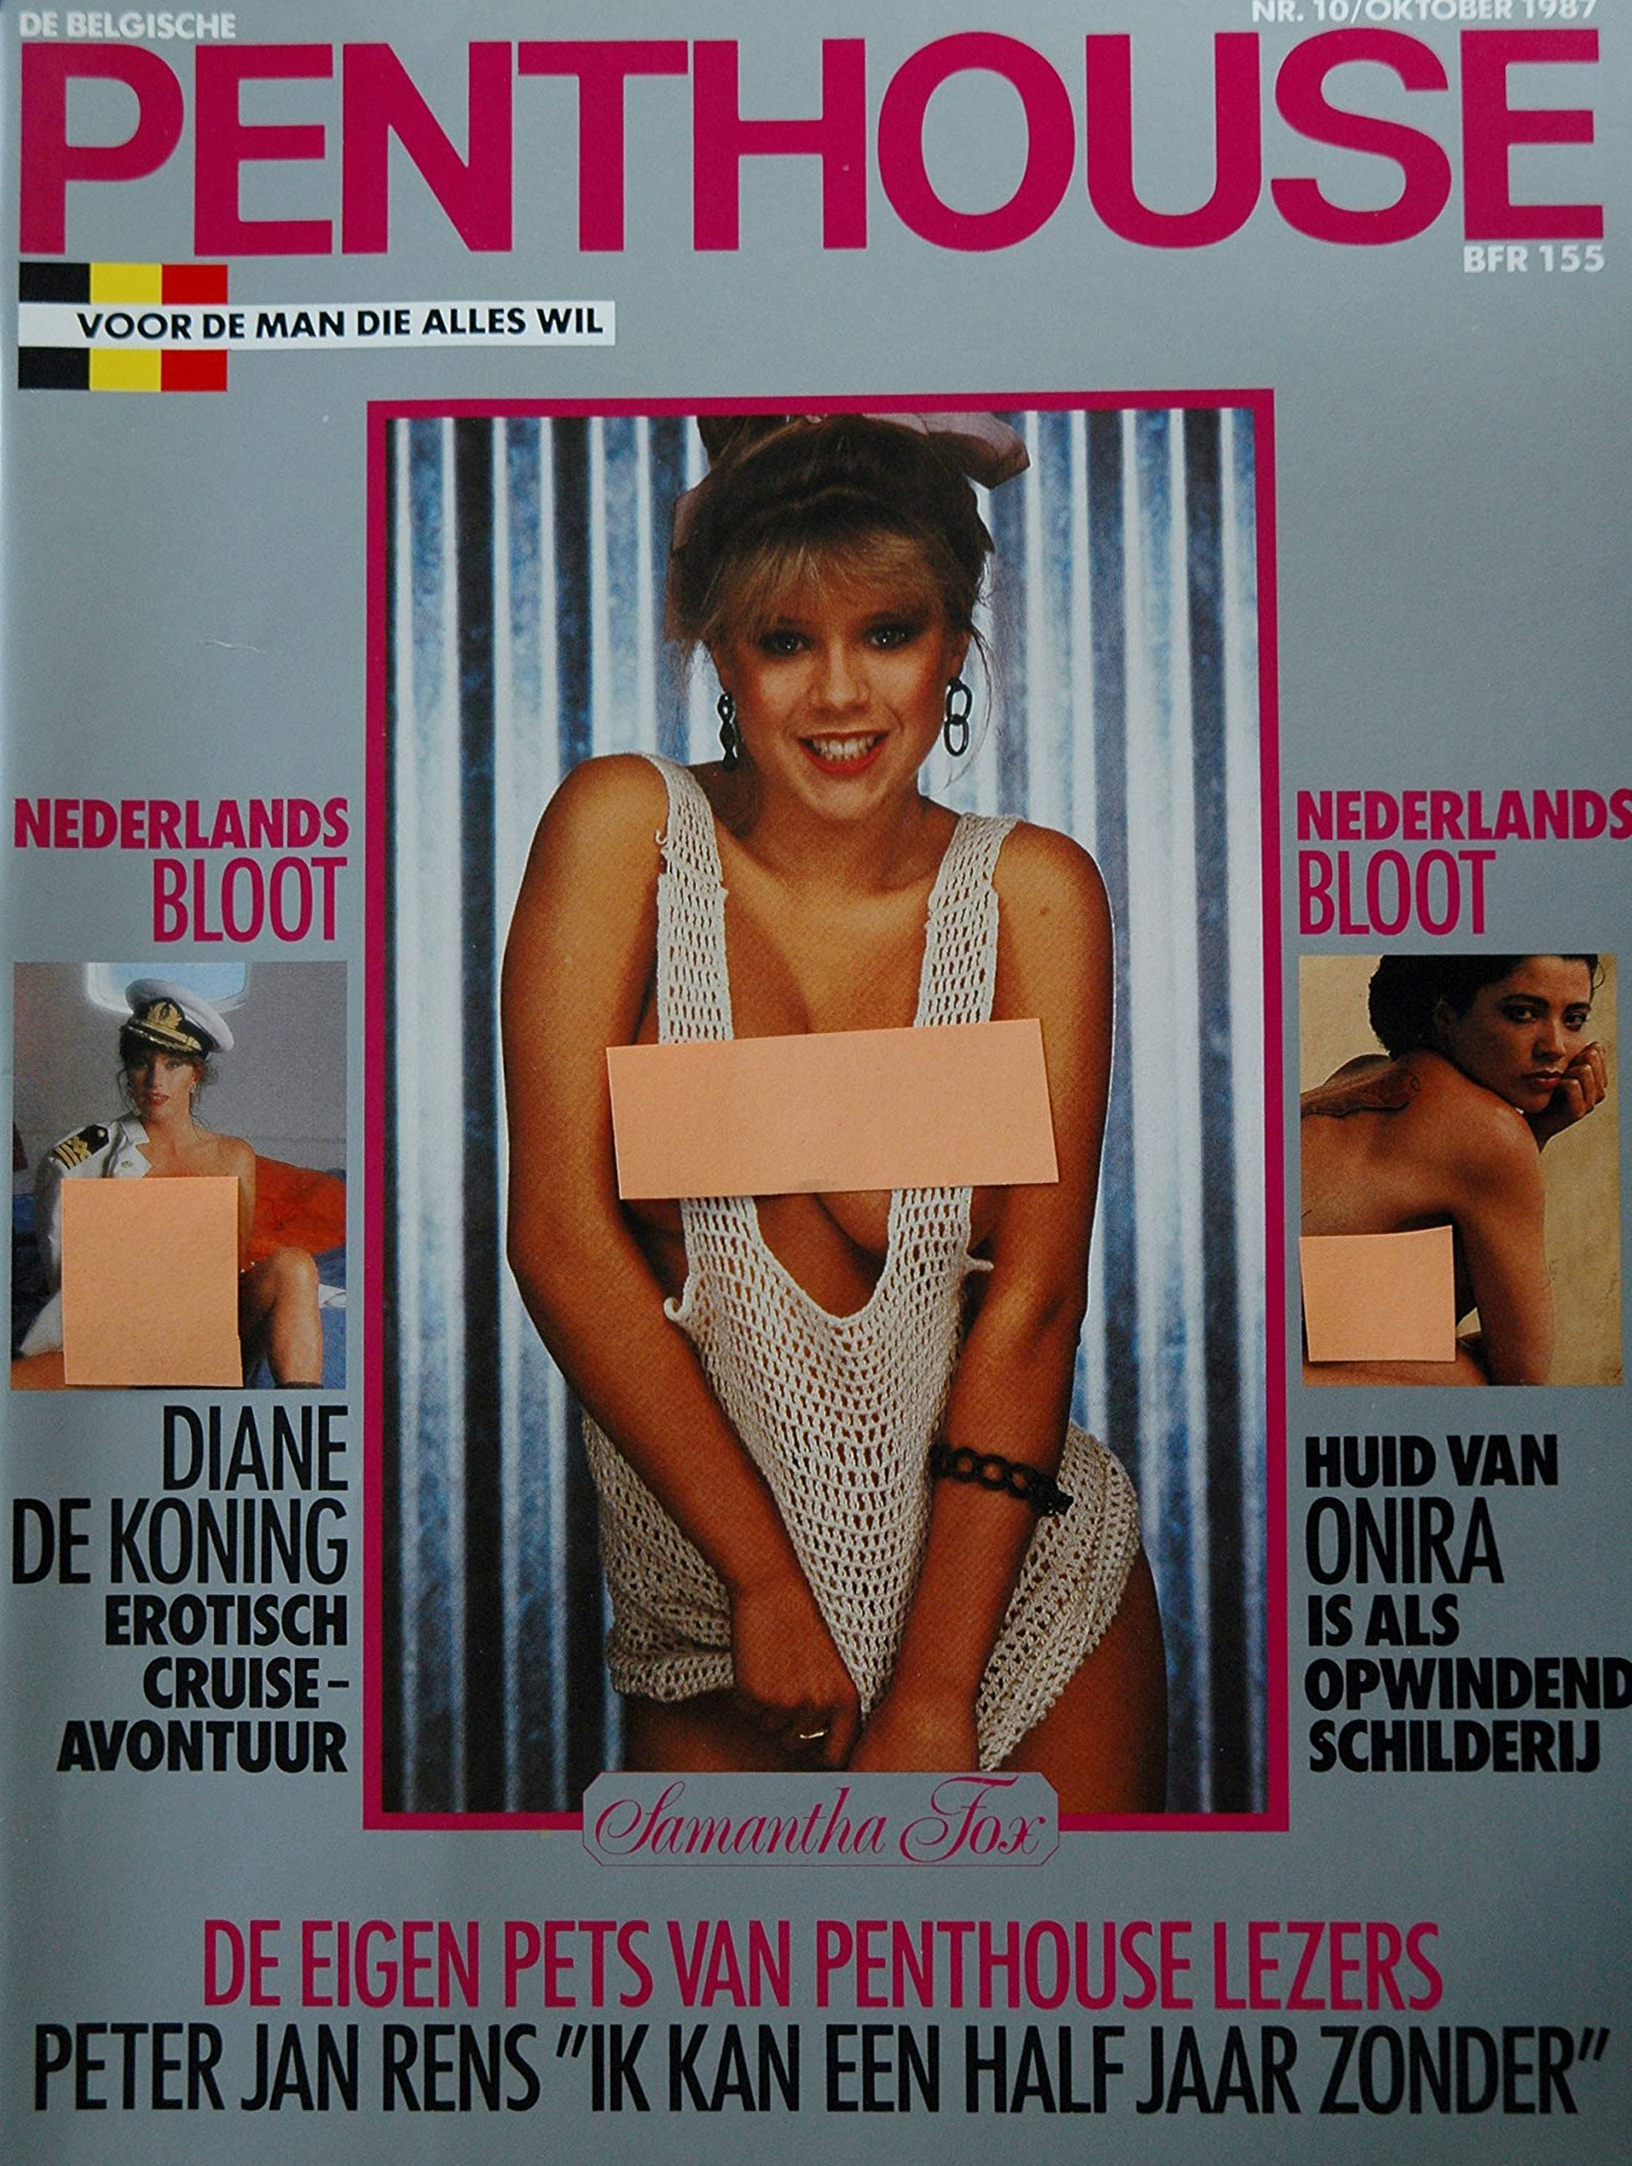 Penthouse (Germany) # 10, October 1987 magazine back issue Penthouse (Germany) magizine back copy Penthouse (Germany) # 10, October 1987 Magazine Back Issue Published by Penthouse Publishing, Bob Guccione. Voor De Man Die Alles Wil.